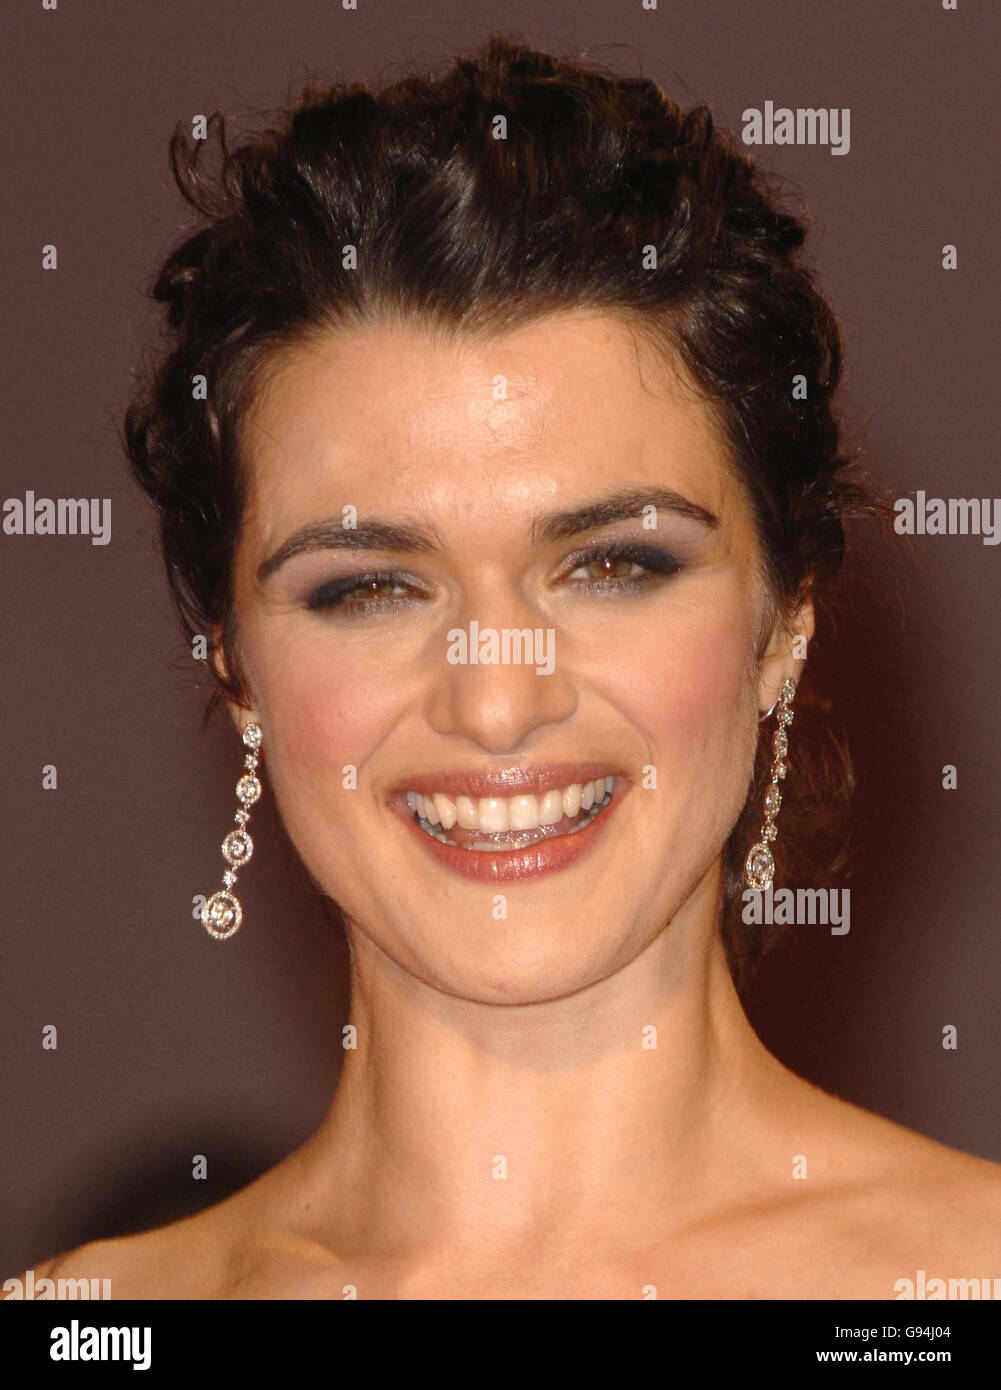 Best Supporting Actress PA File image dated 31-08-2005 showing Rachel Weisz, who has just been nominated for Best Supporting Actress for the forthcoming Academy Awards for her role in 'The Constant Gardener', London, Tuesday 31 January 2006. PRESS ASSOCIATION photo. Photo Credit should read: Ian West/PA. Stock Photo